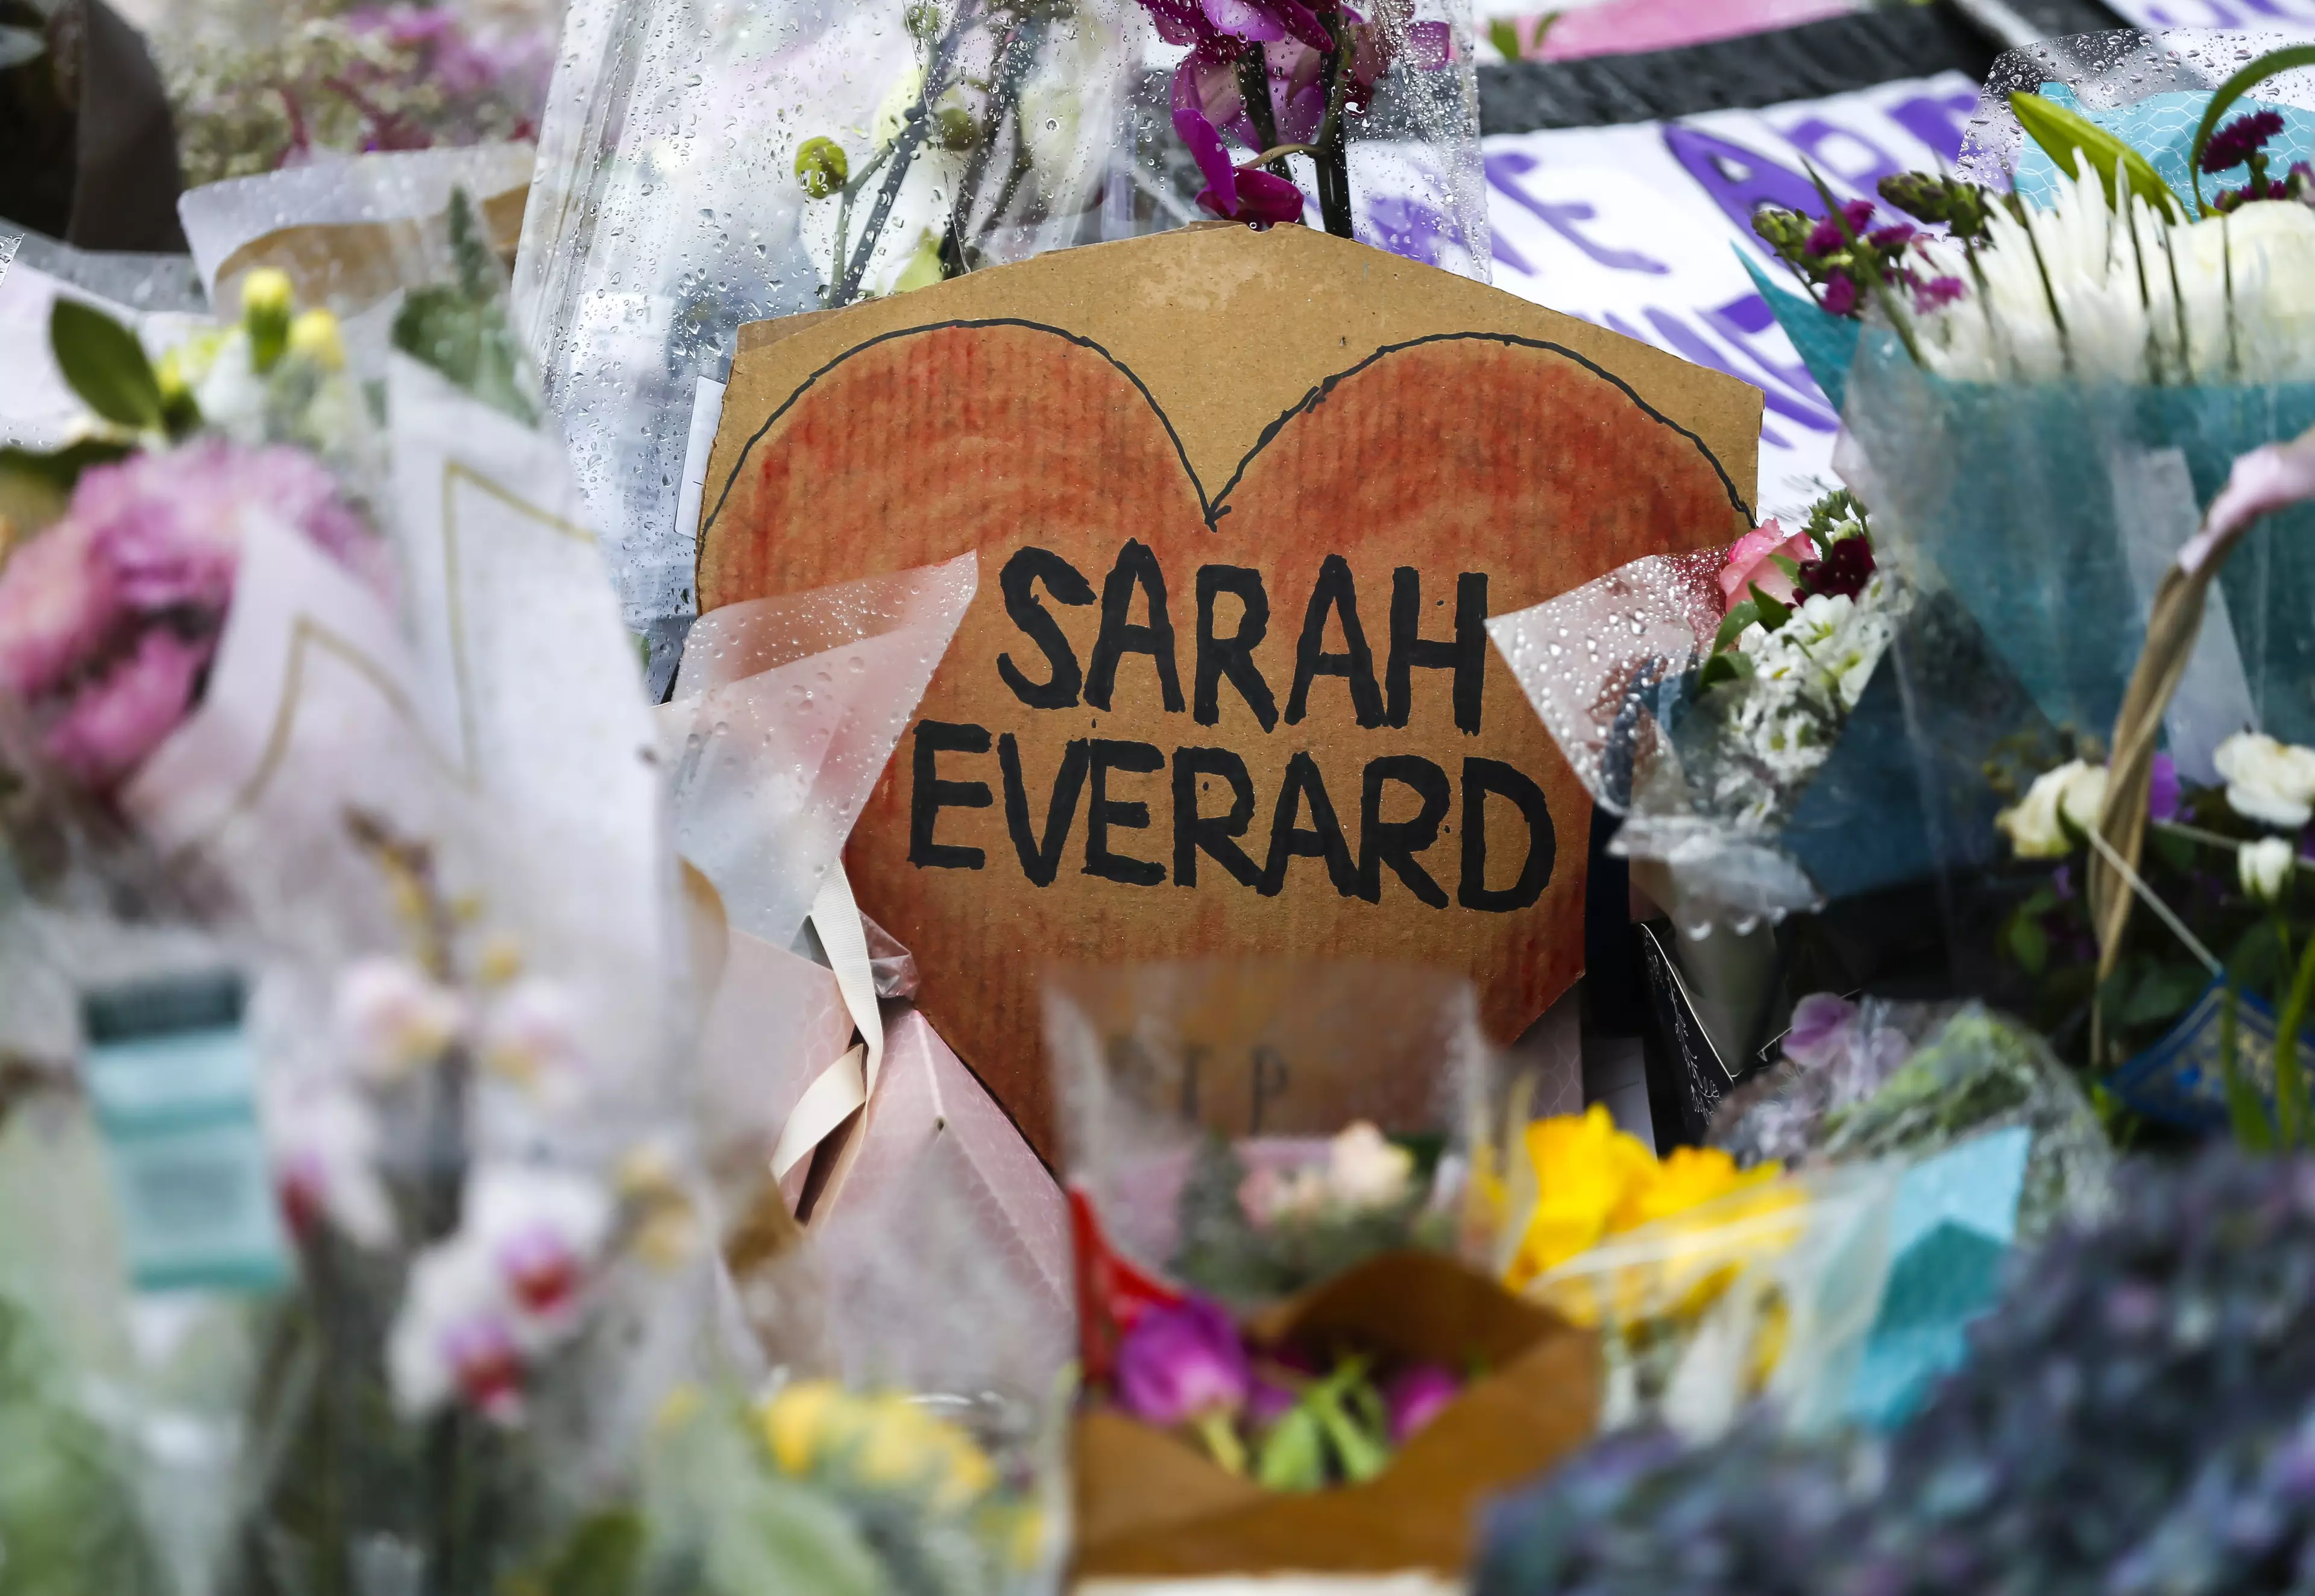 Sarah Everard's death has led to a public outcry, with people demanding better protection of women.